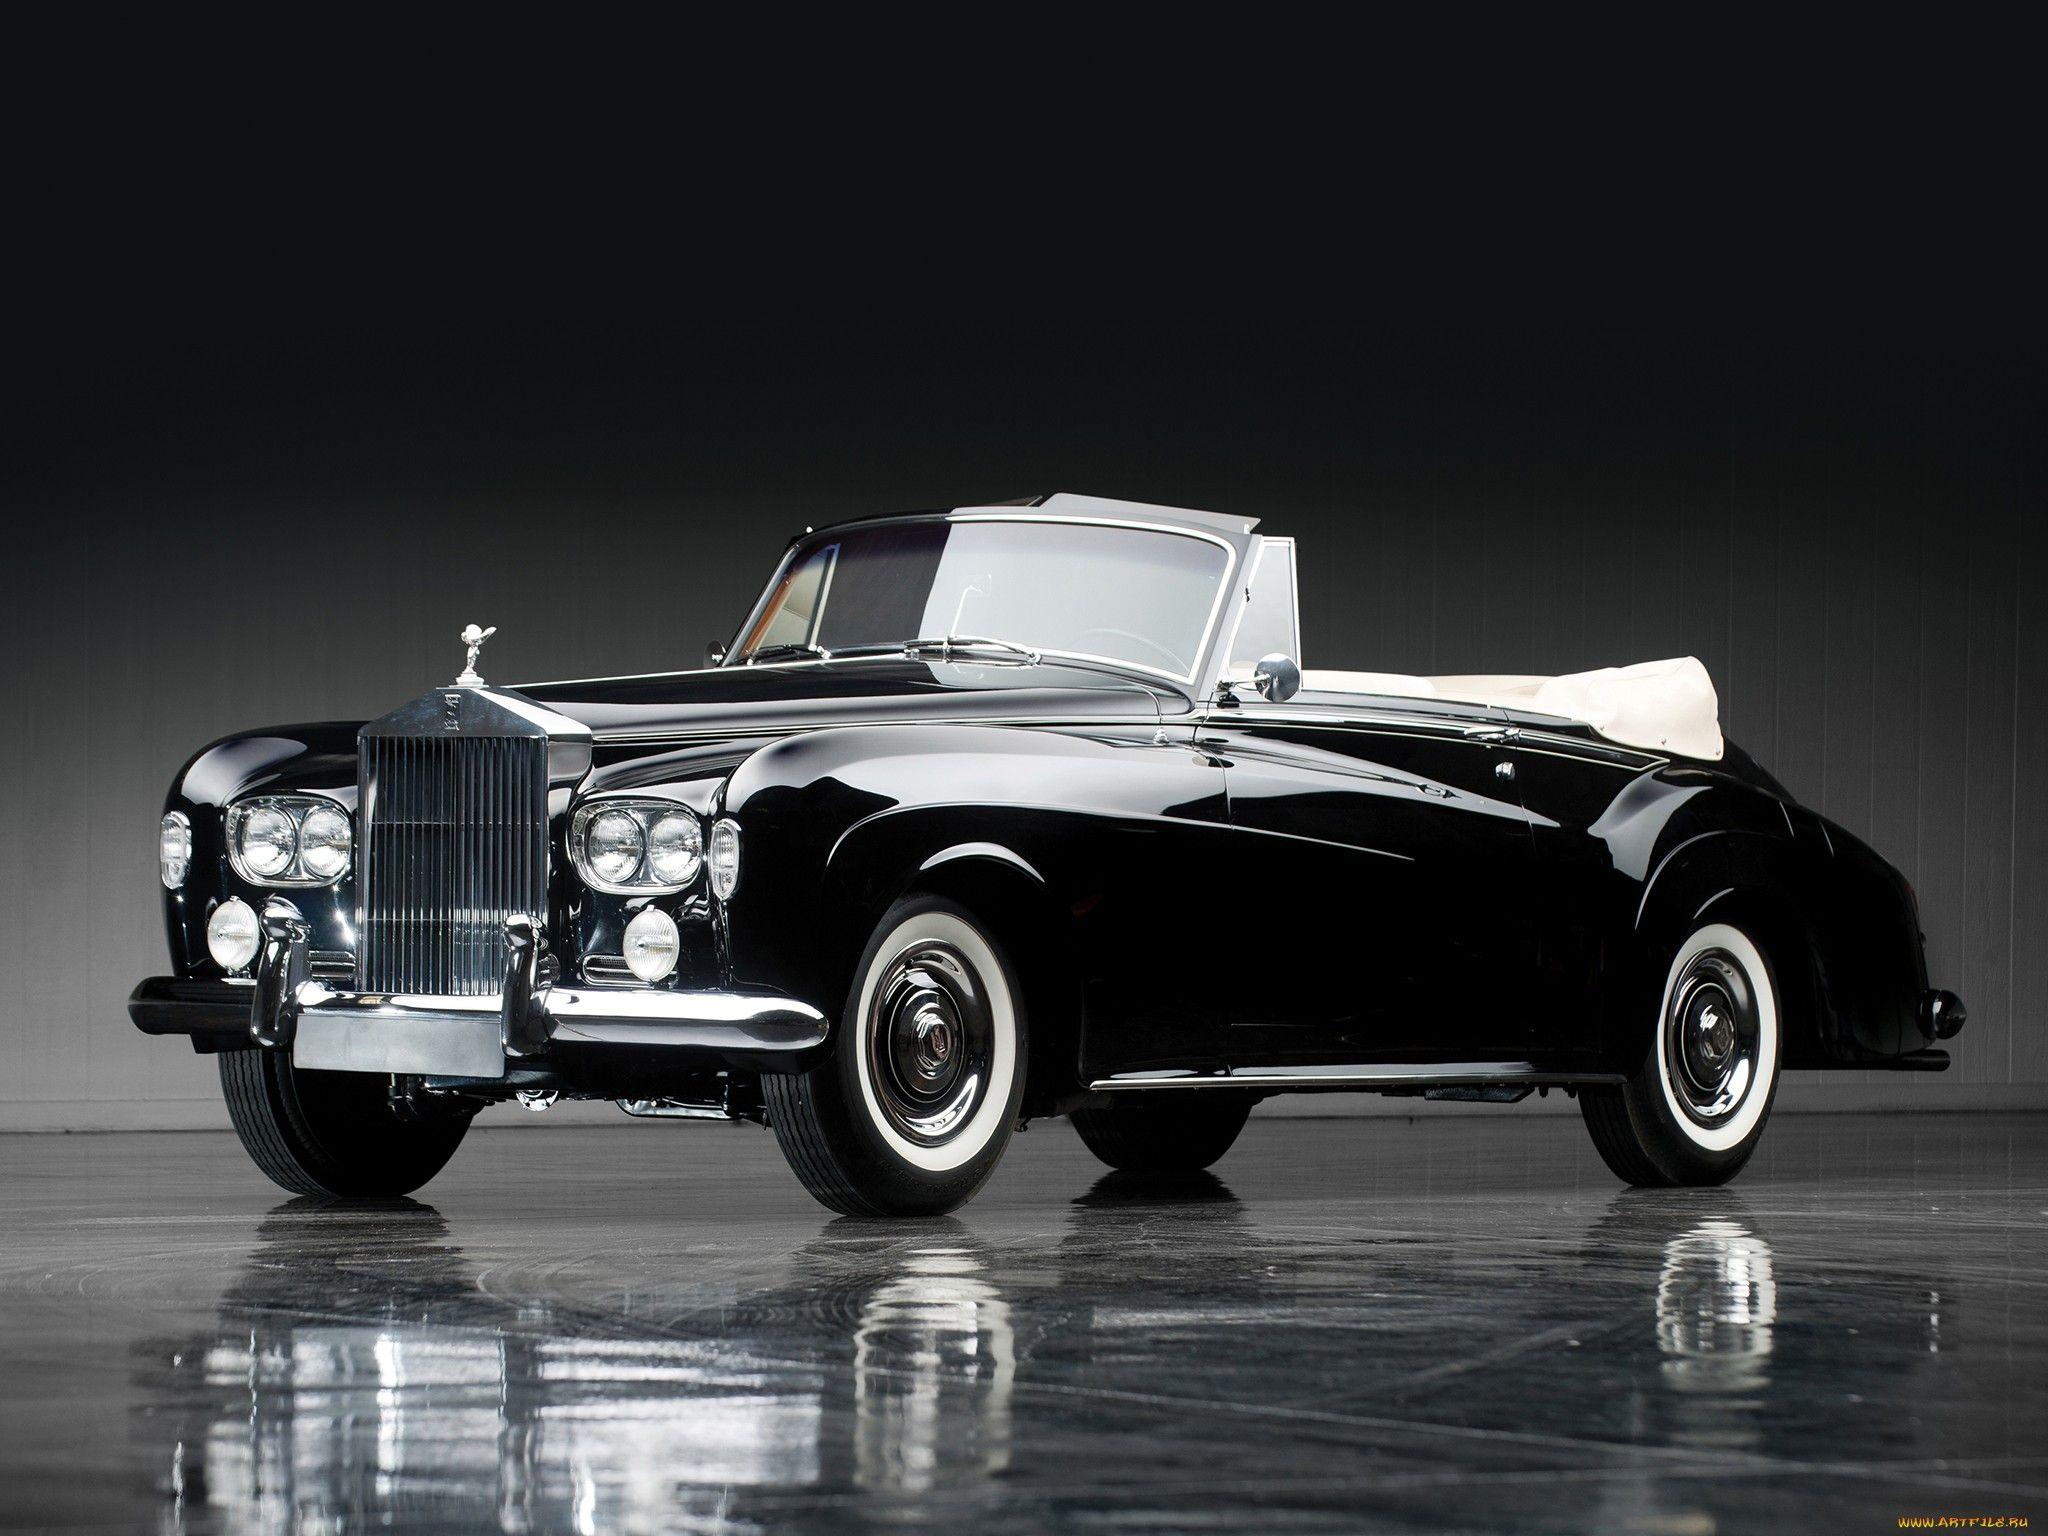 Classic Rolls Royce Wallpaper Image with High Resolution Wallpaper